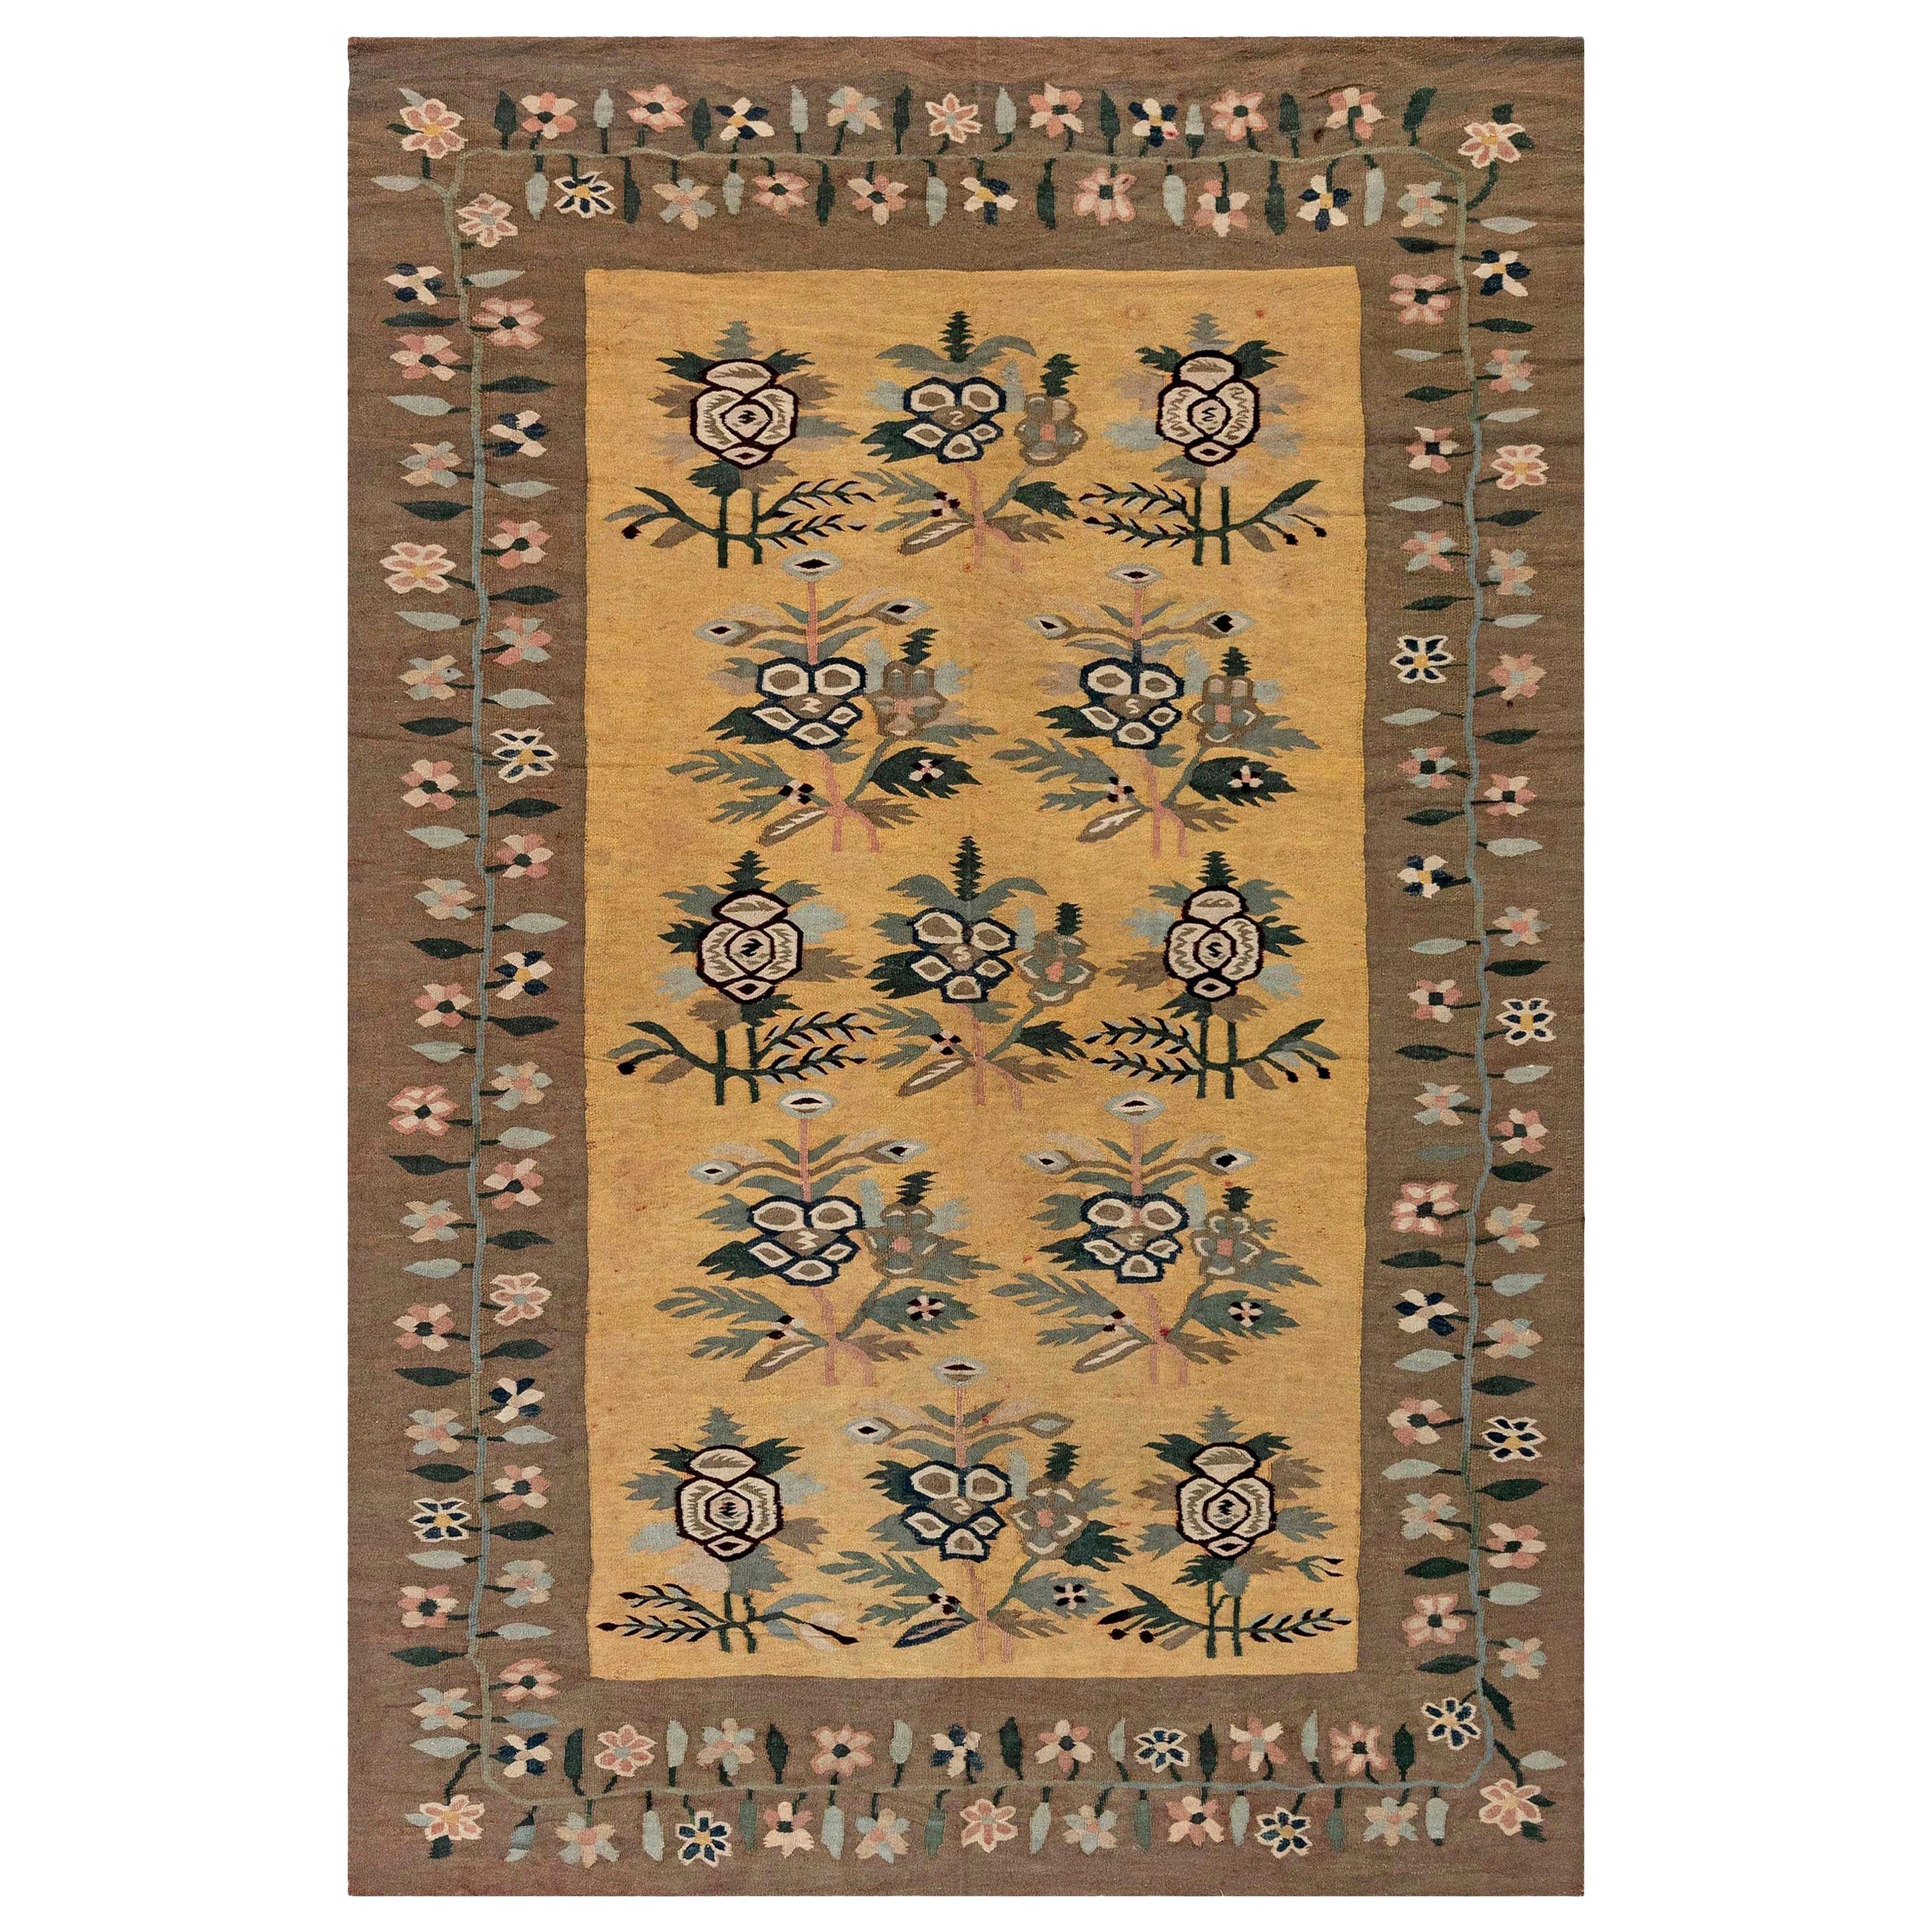 Early 20th Century Bessarabian Floral Rug